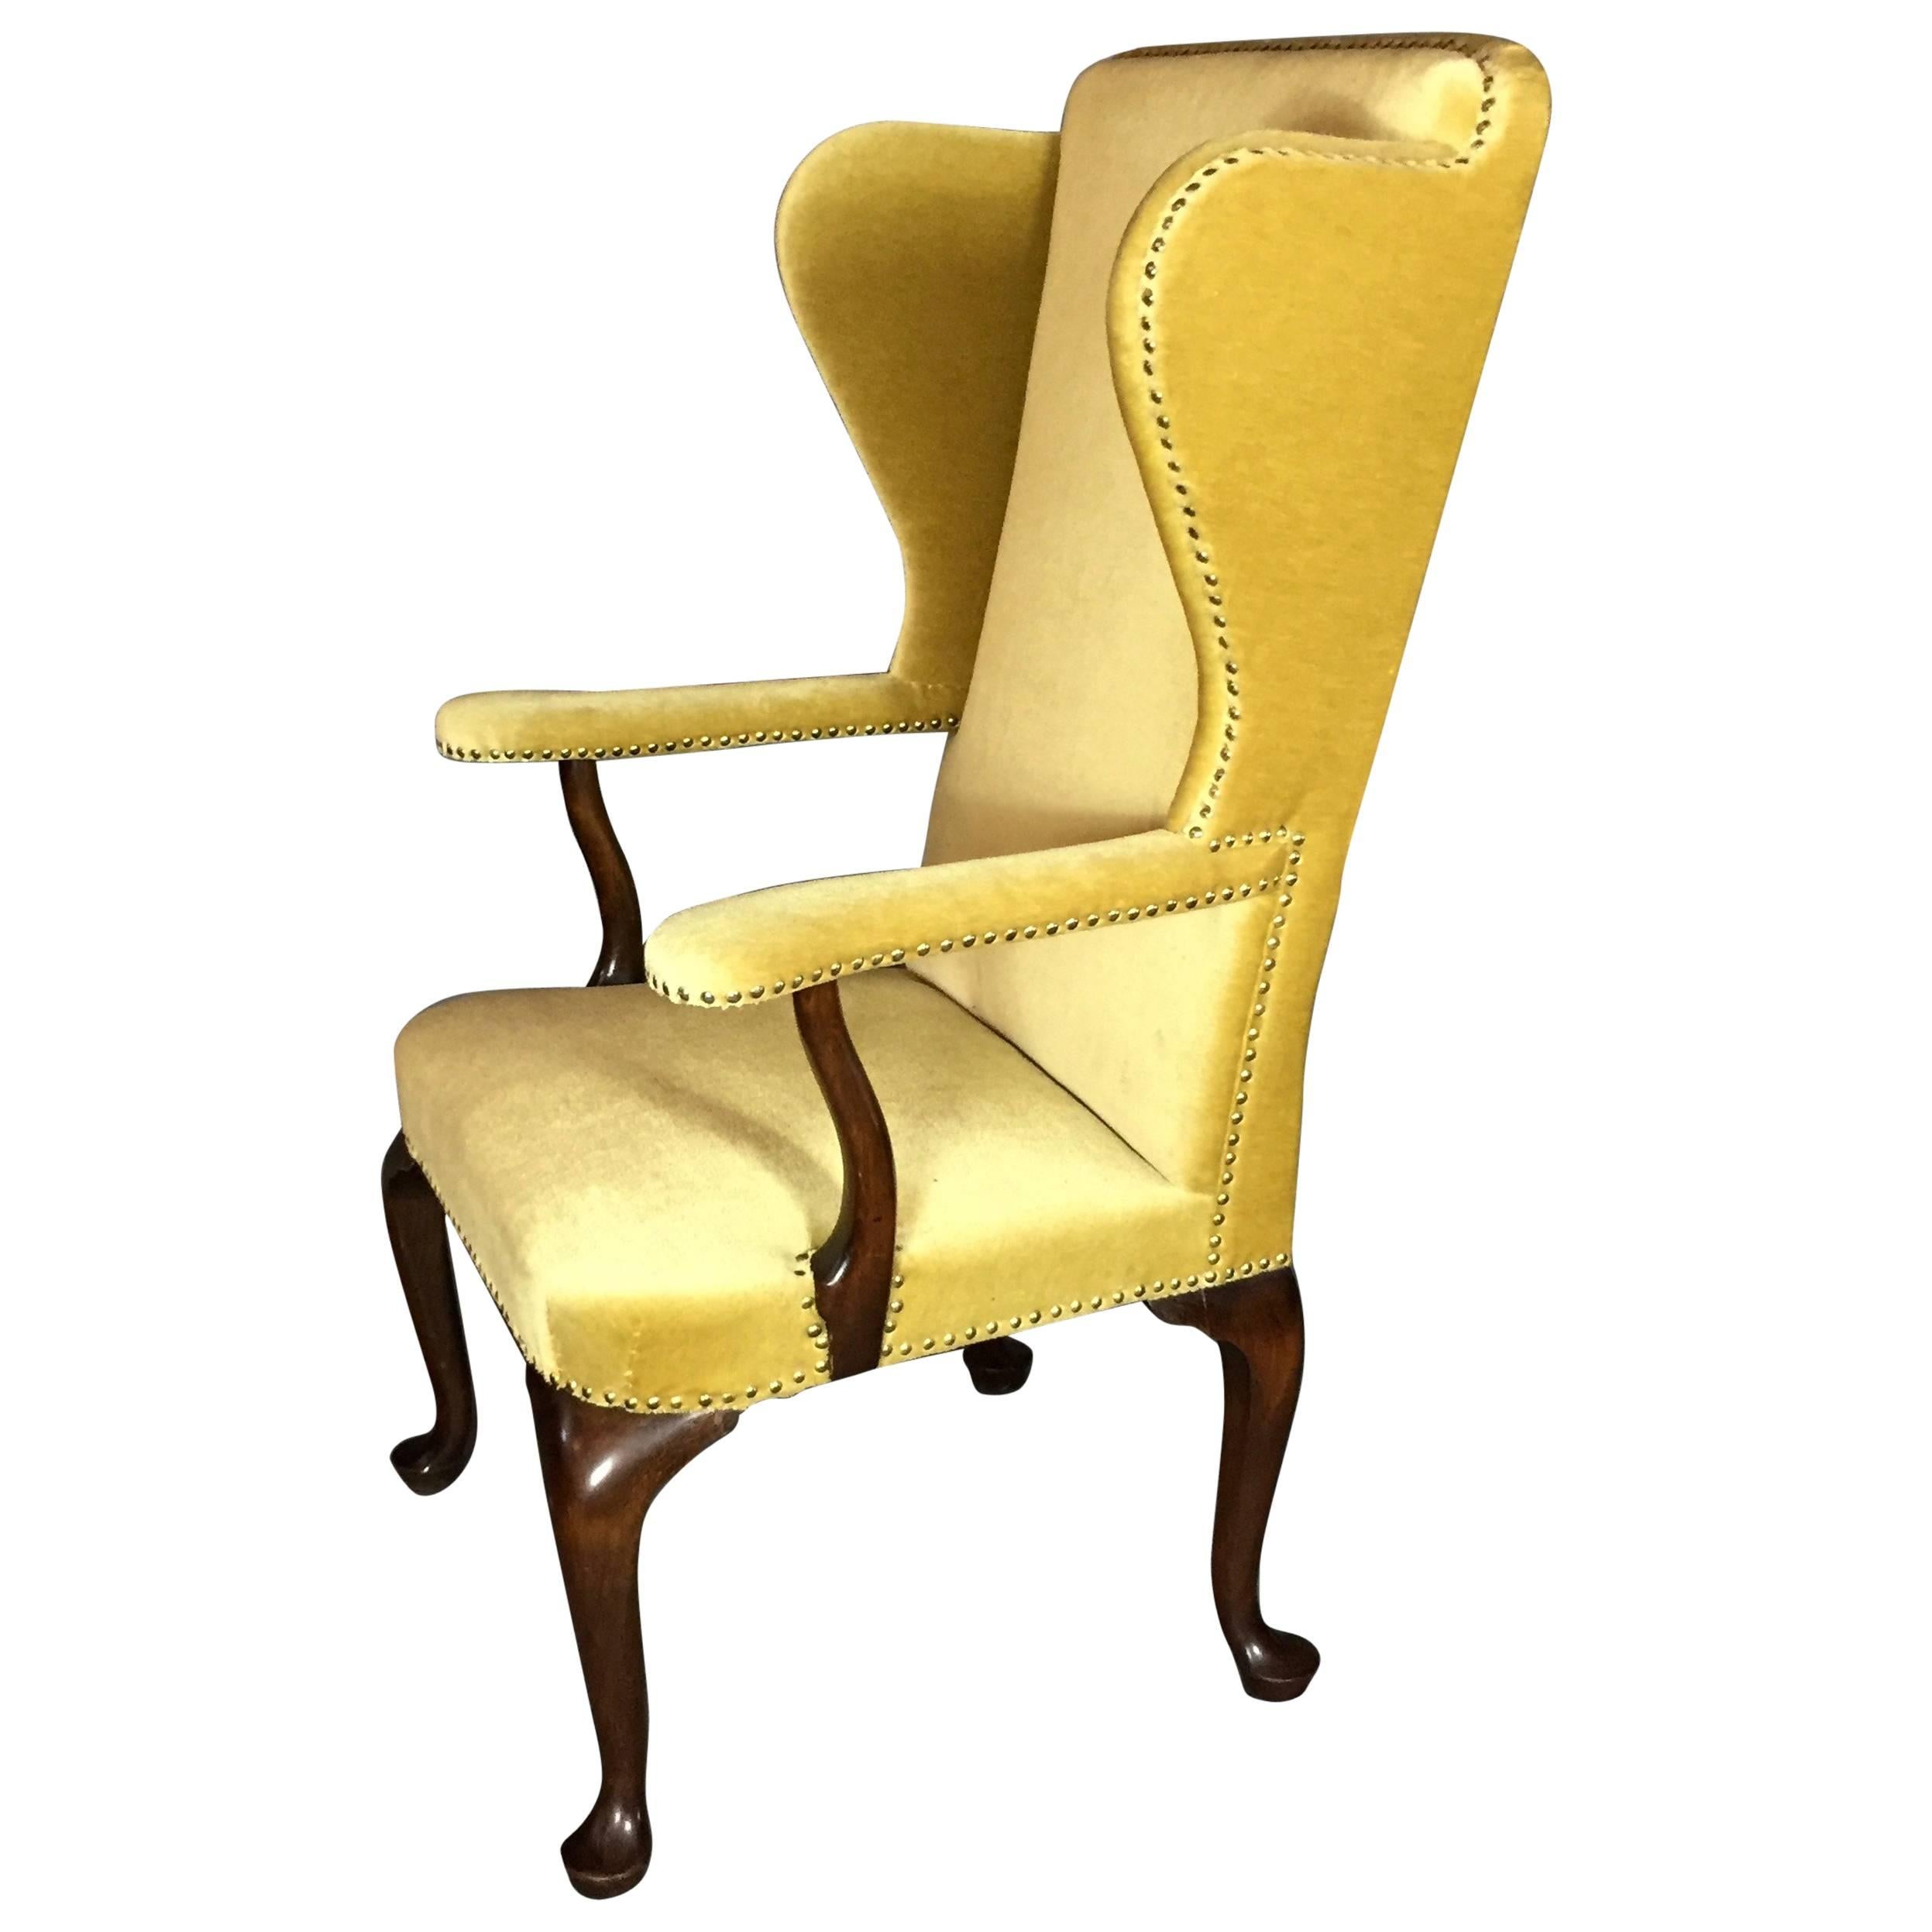 Frits Henningsen Attributed to Wingback Chair in Gold Mohair, Denmark